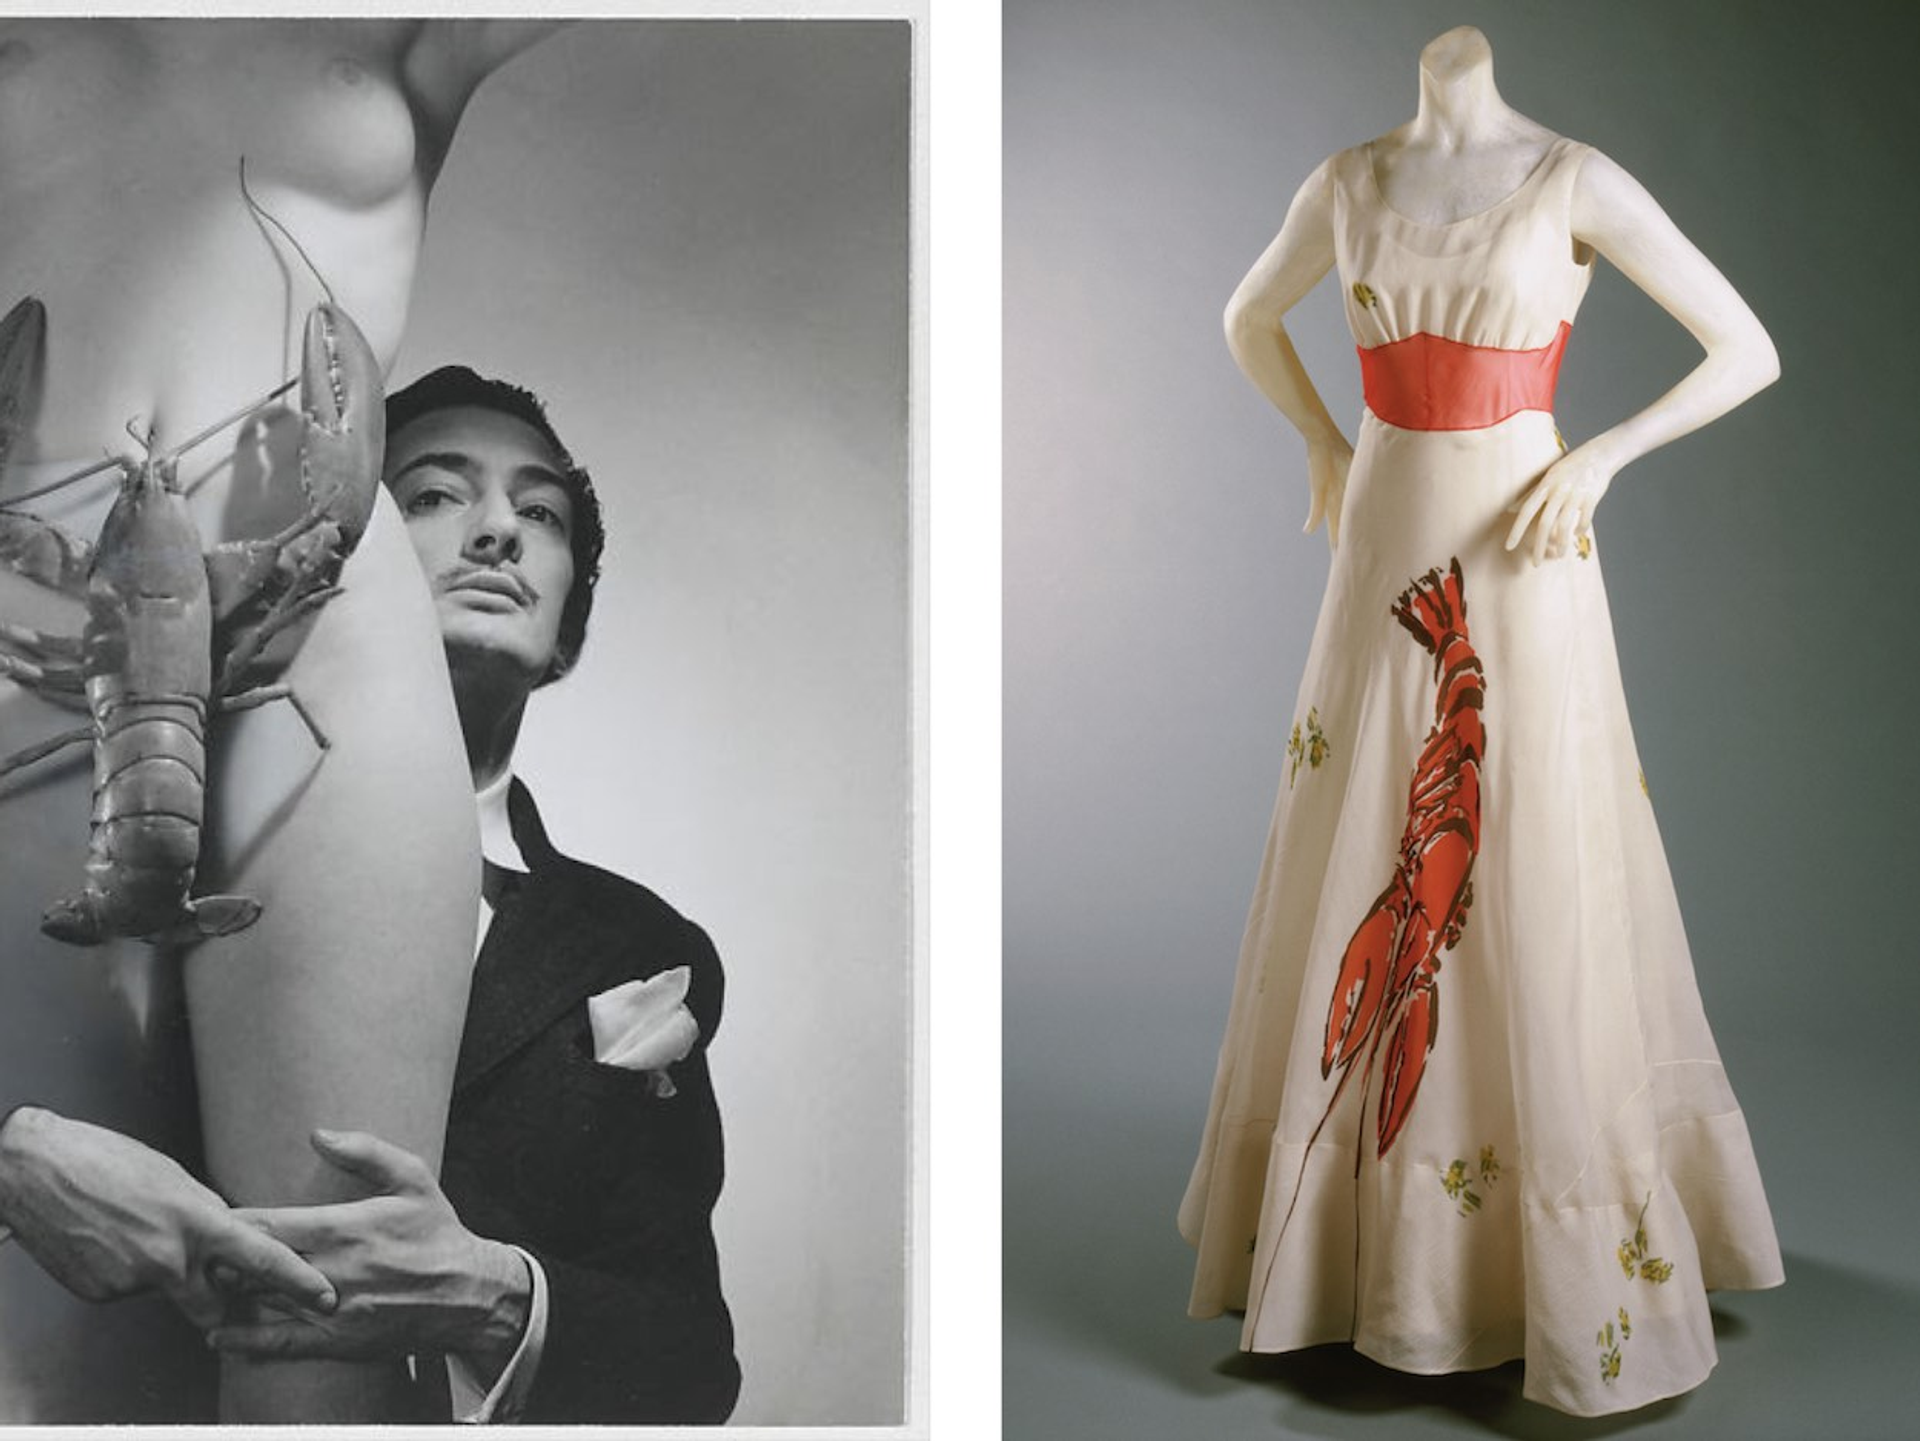 Two photographs: the left is a black and white photograph of artist Salvador Dali holding the legs of a nude mannequin with a lobster covering the genital area, and the right photograph is of a mannequin wearing a silk gown with a red lobster printed in the centre